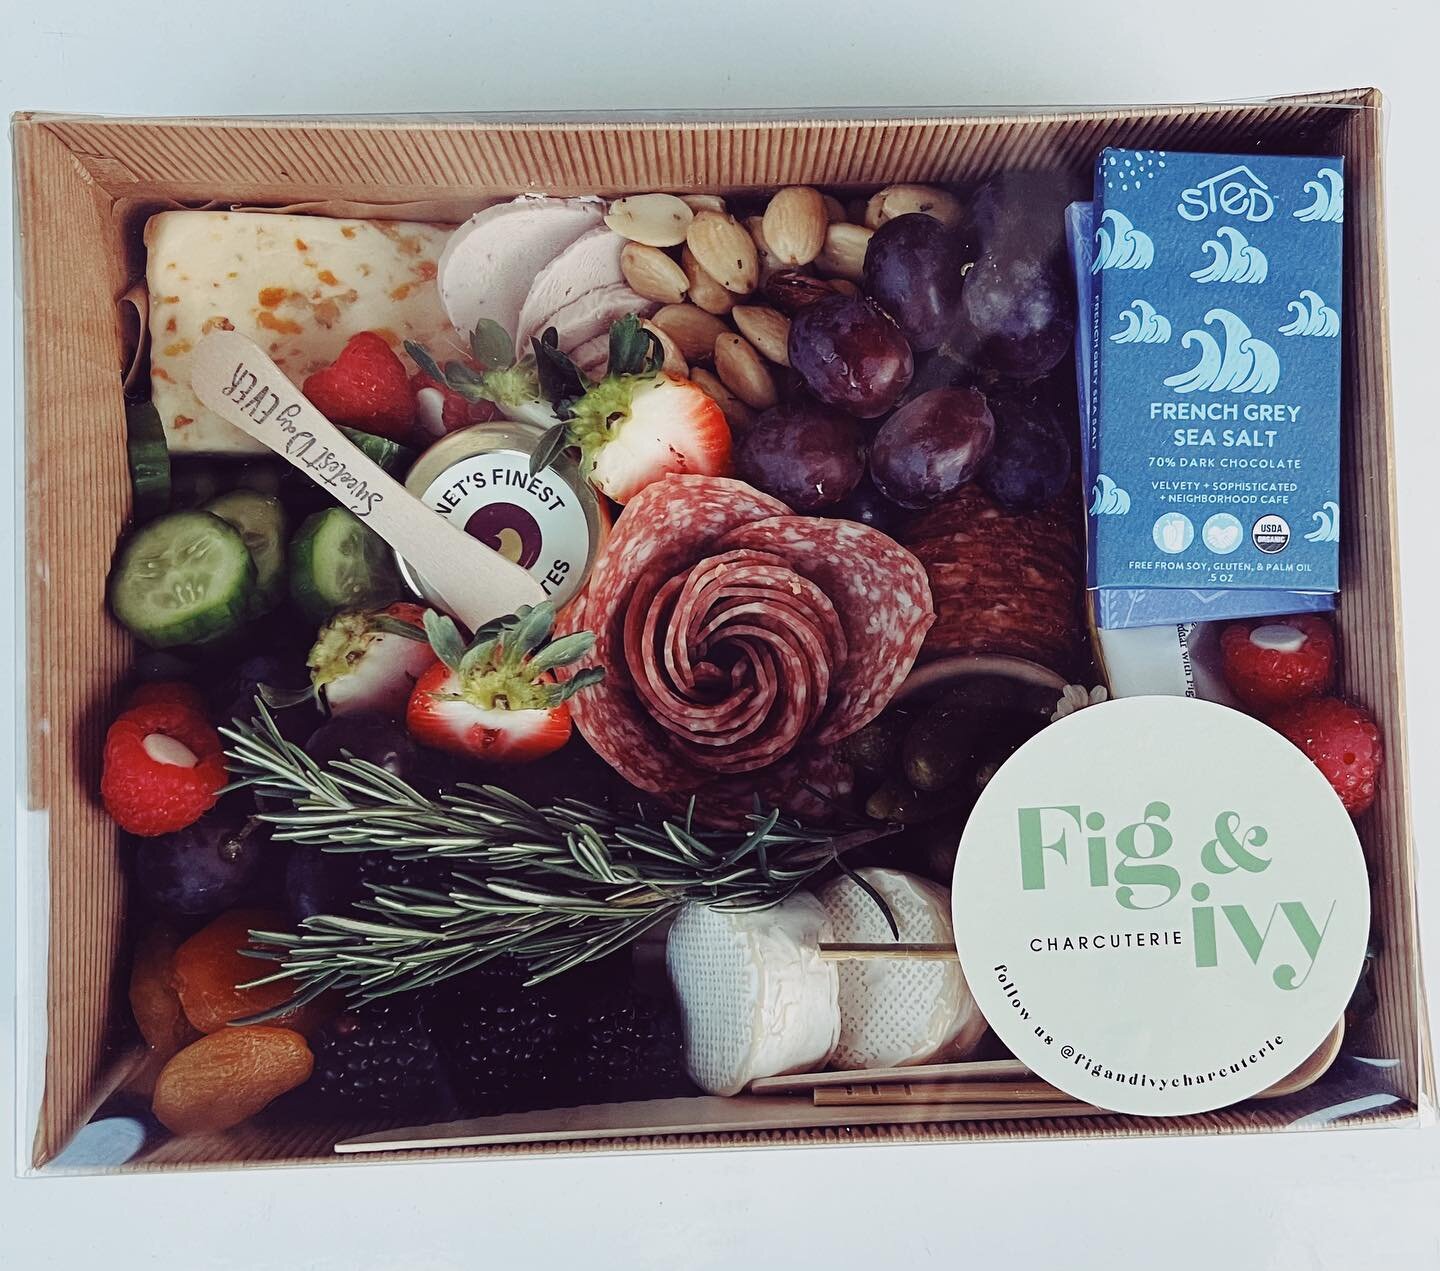 🌷🧺Spring is in the air which means it&rsquo;s almost picnic season! Take a charcuterie to-go box on your next adventure! 🌷 🧺 

#firstdayofspring #charcuterie #mncharcuterie #spring #picnicdate #picnicseason #outdoorliving #mncatering #mnsmallbusi